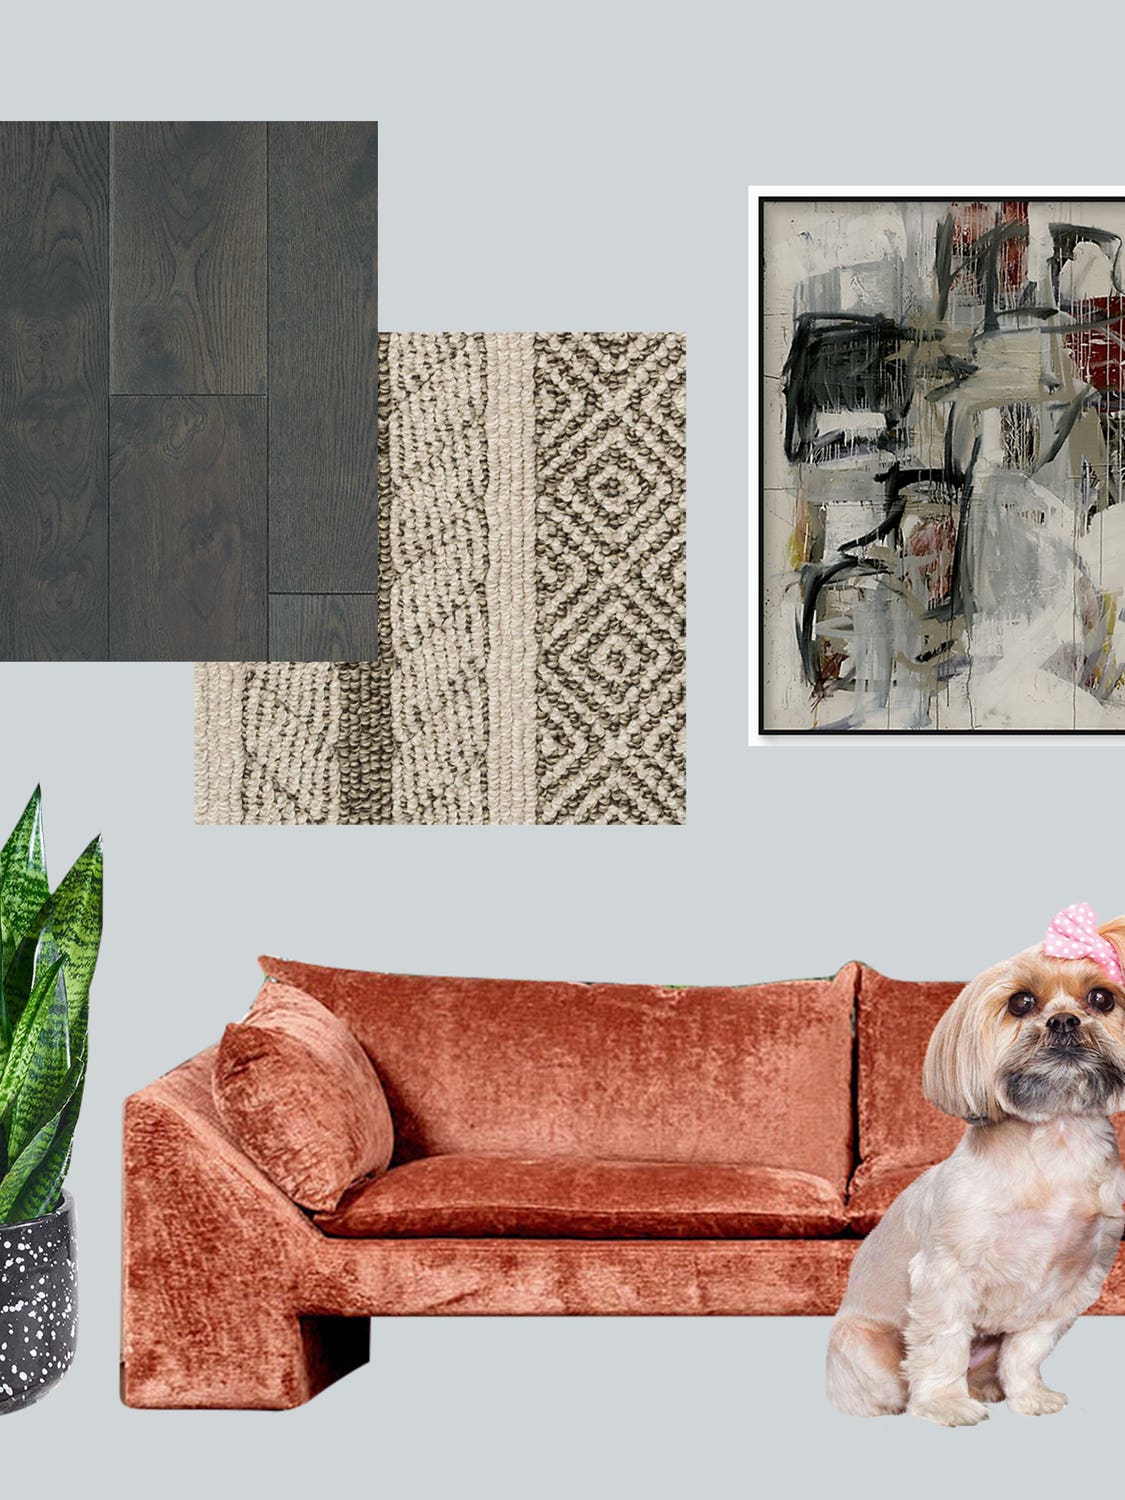 Can Flooring Be Chic and Pet-Friendly?